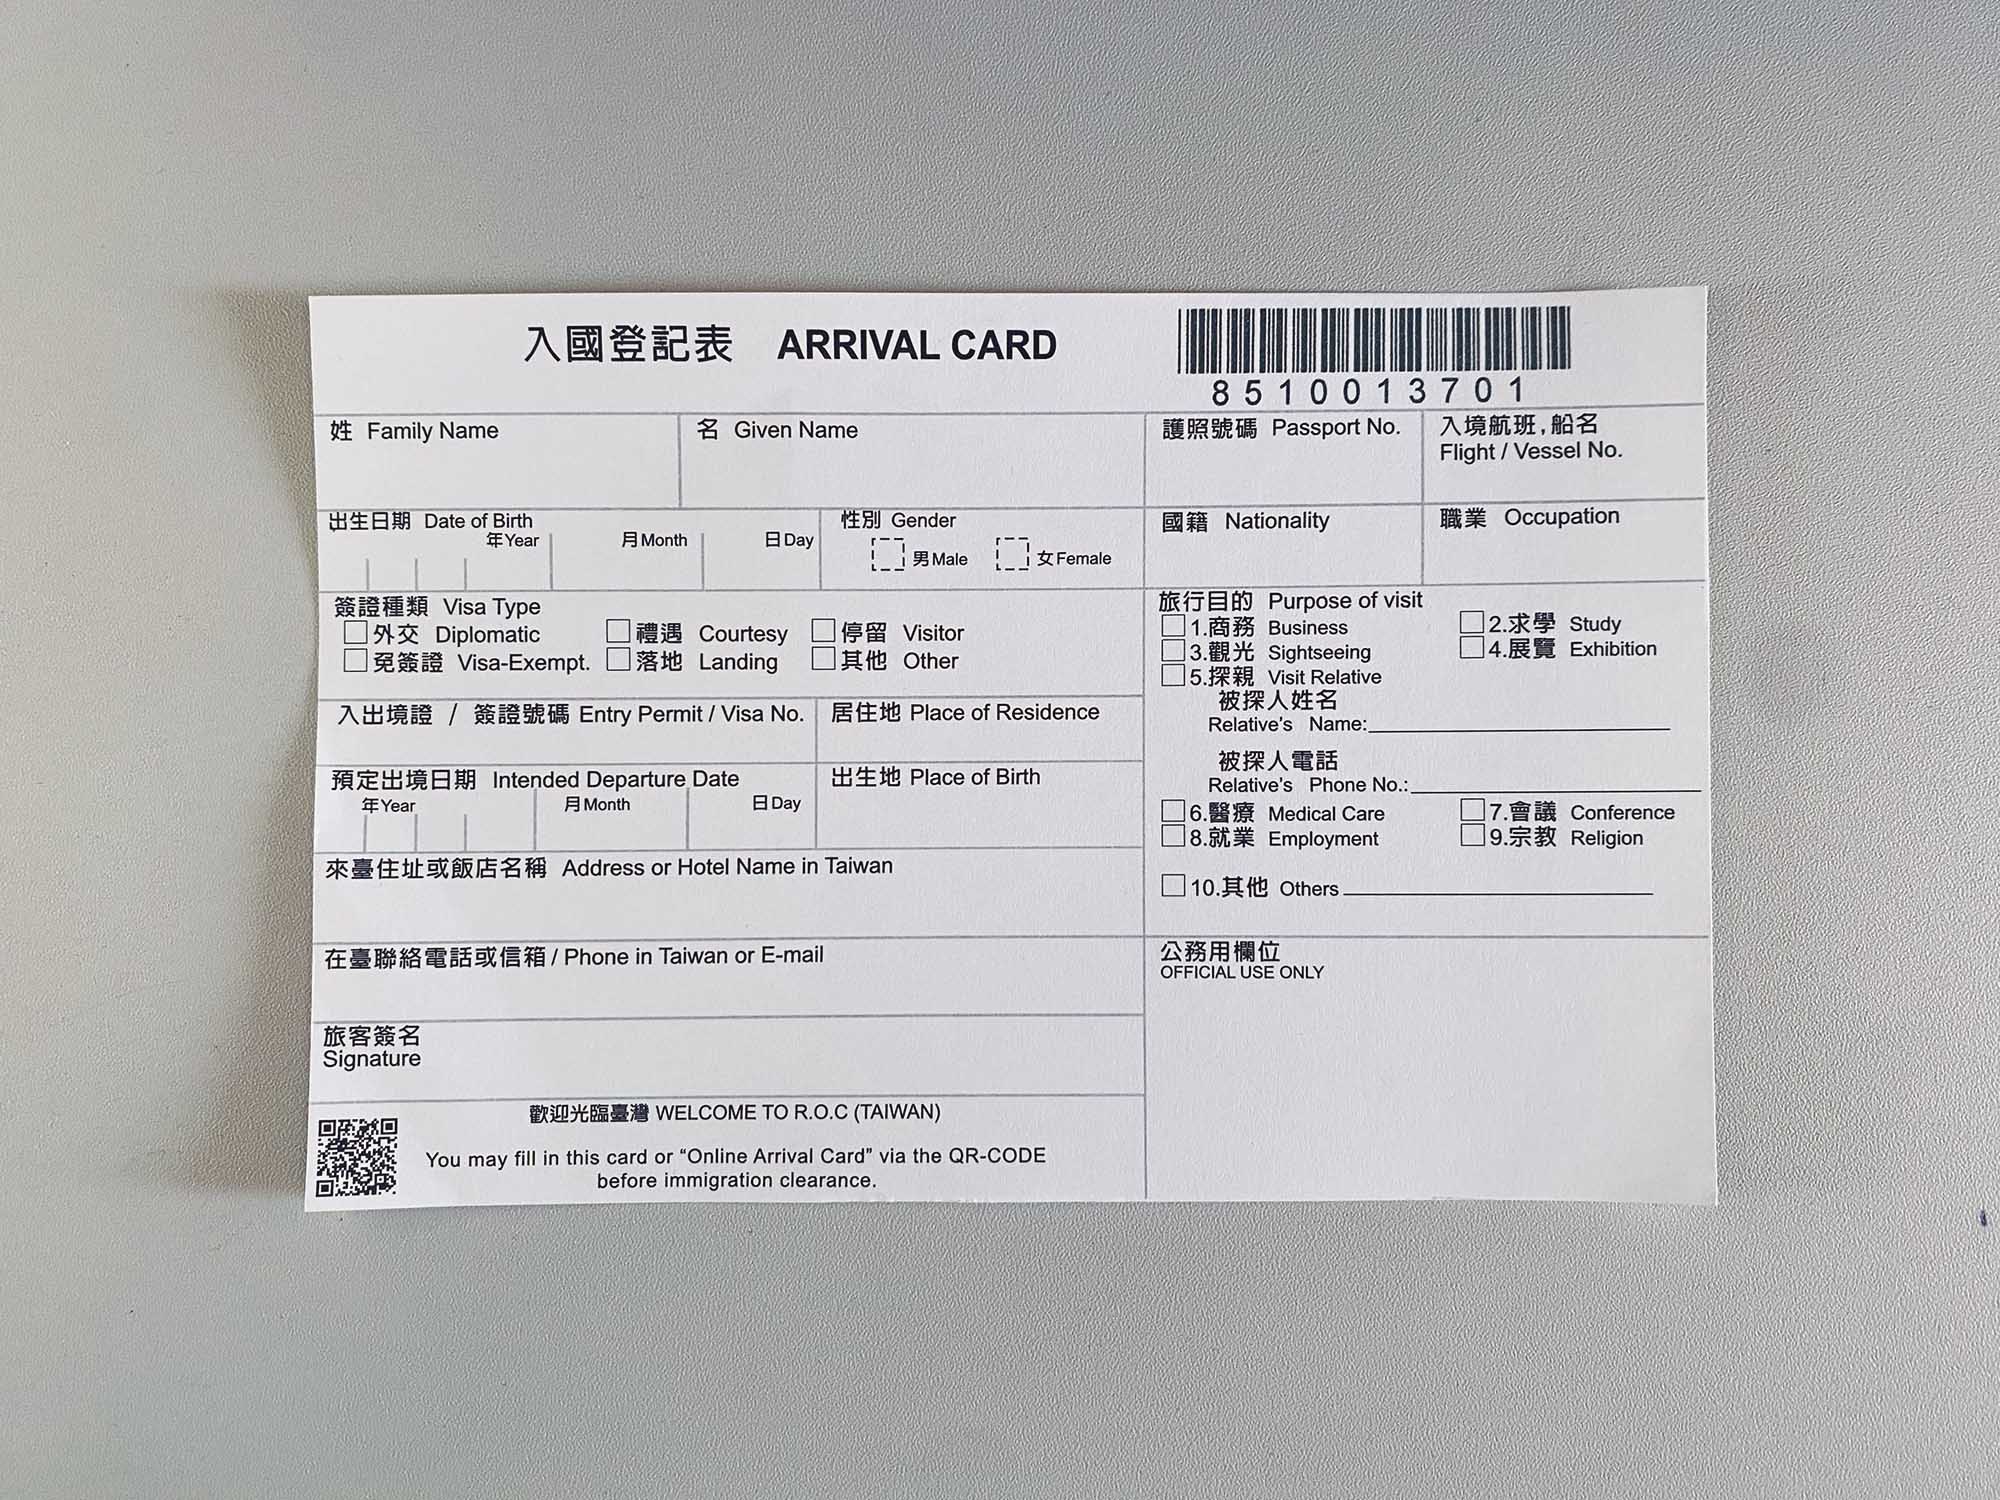 A small bilingual government form in a light grey surface – in traditional Chinese and English it says ‘ARRIVAL CARD’; it contains about two dozen fields including name, date of birth, address, passport number, purpose of visit